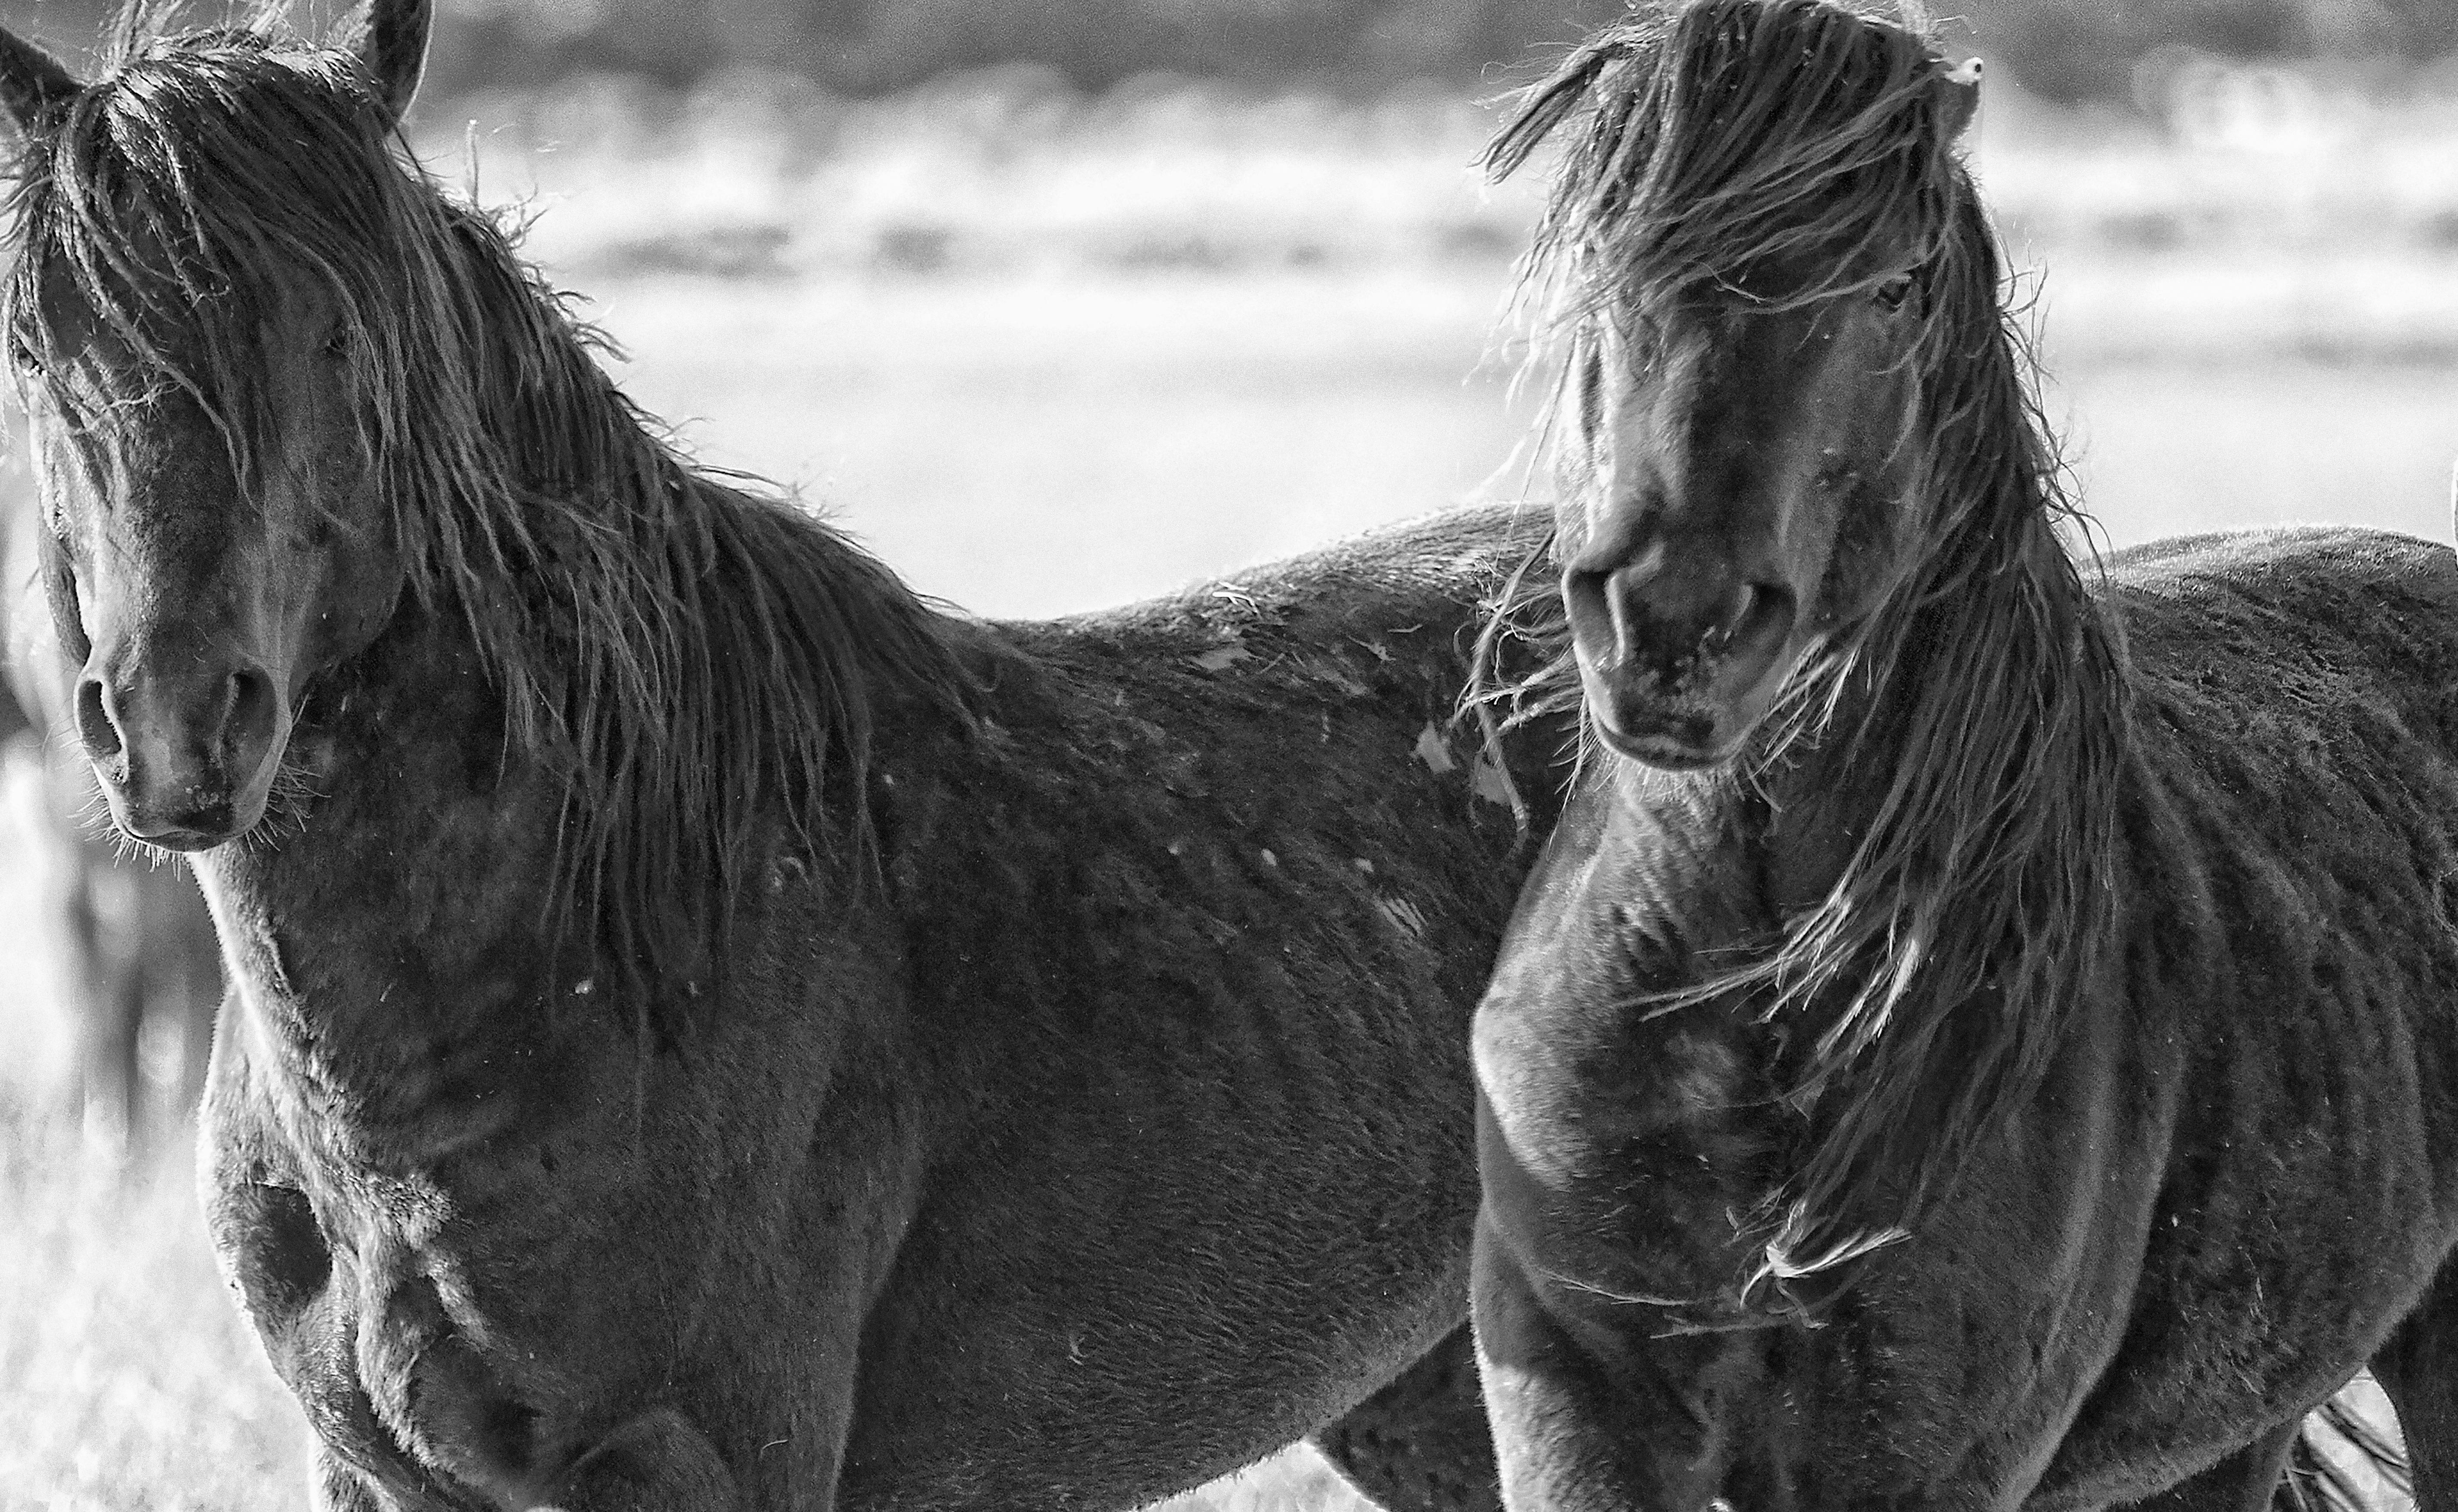 Shane Russeck Animal Print - 24x40 Band of Brothers - Photography of Wild Horses(Special 1stdibs Price)